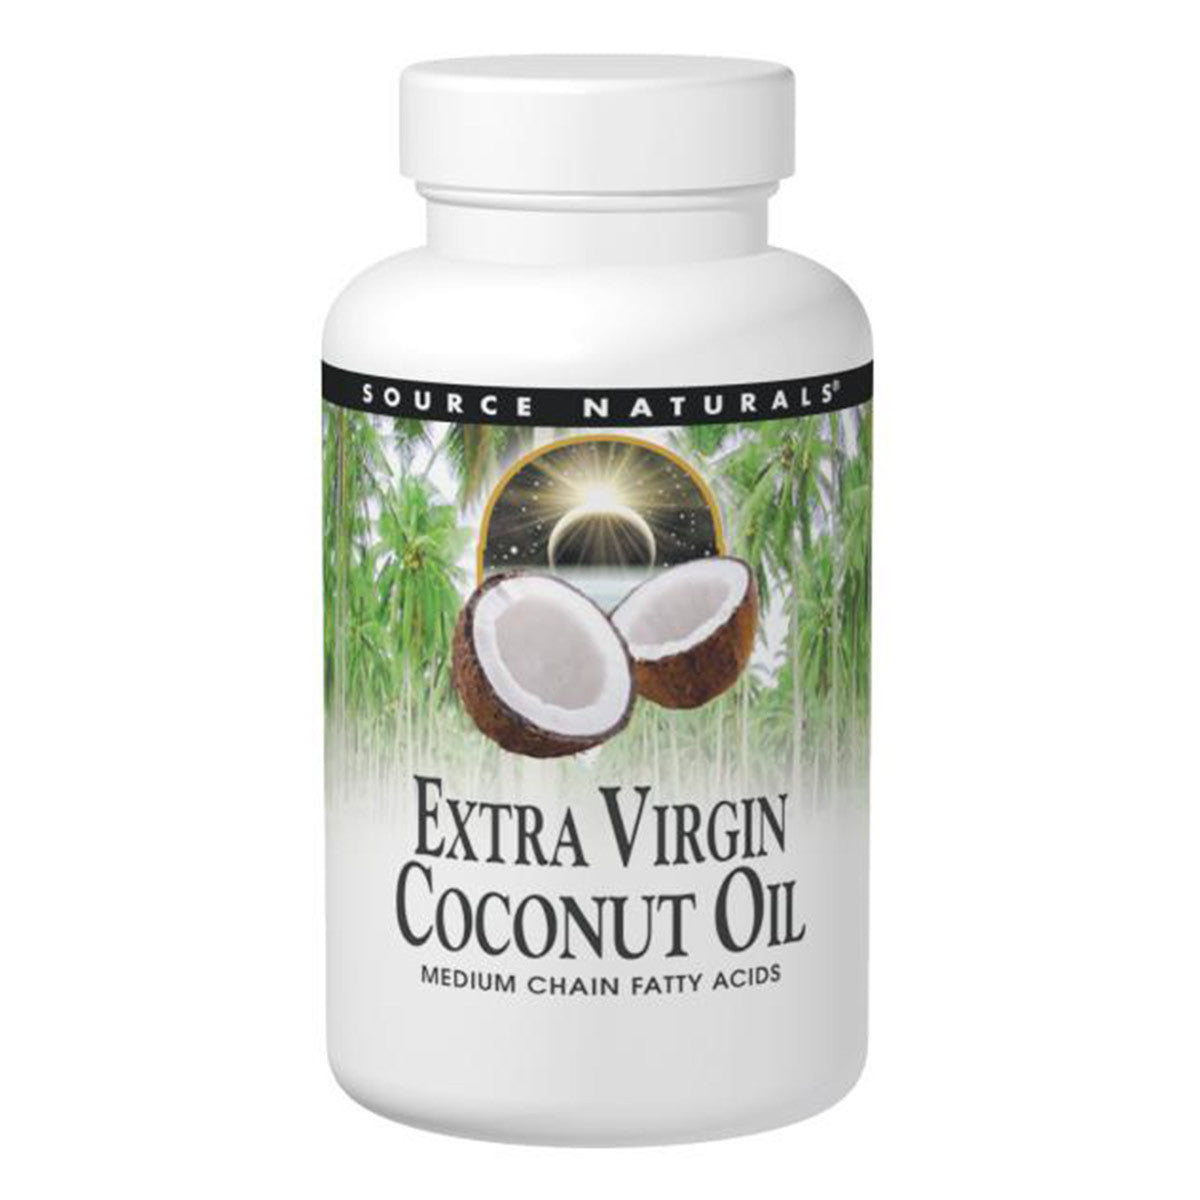 Primary image of Extra Virgin Coconut Oil